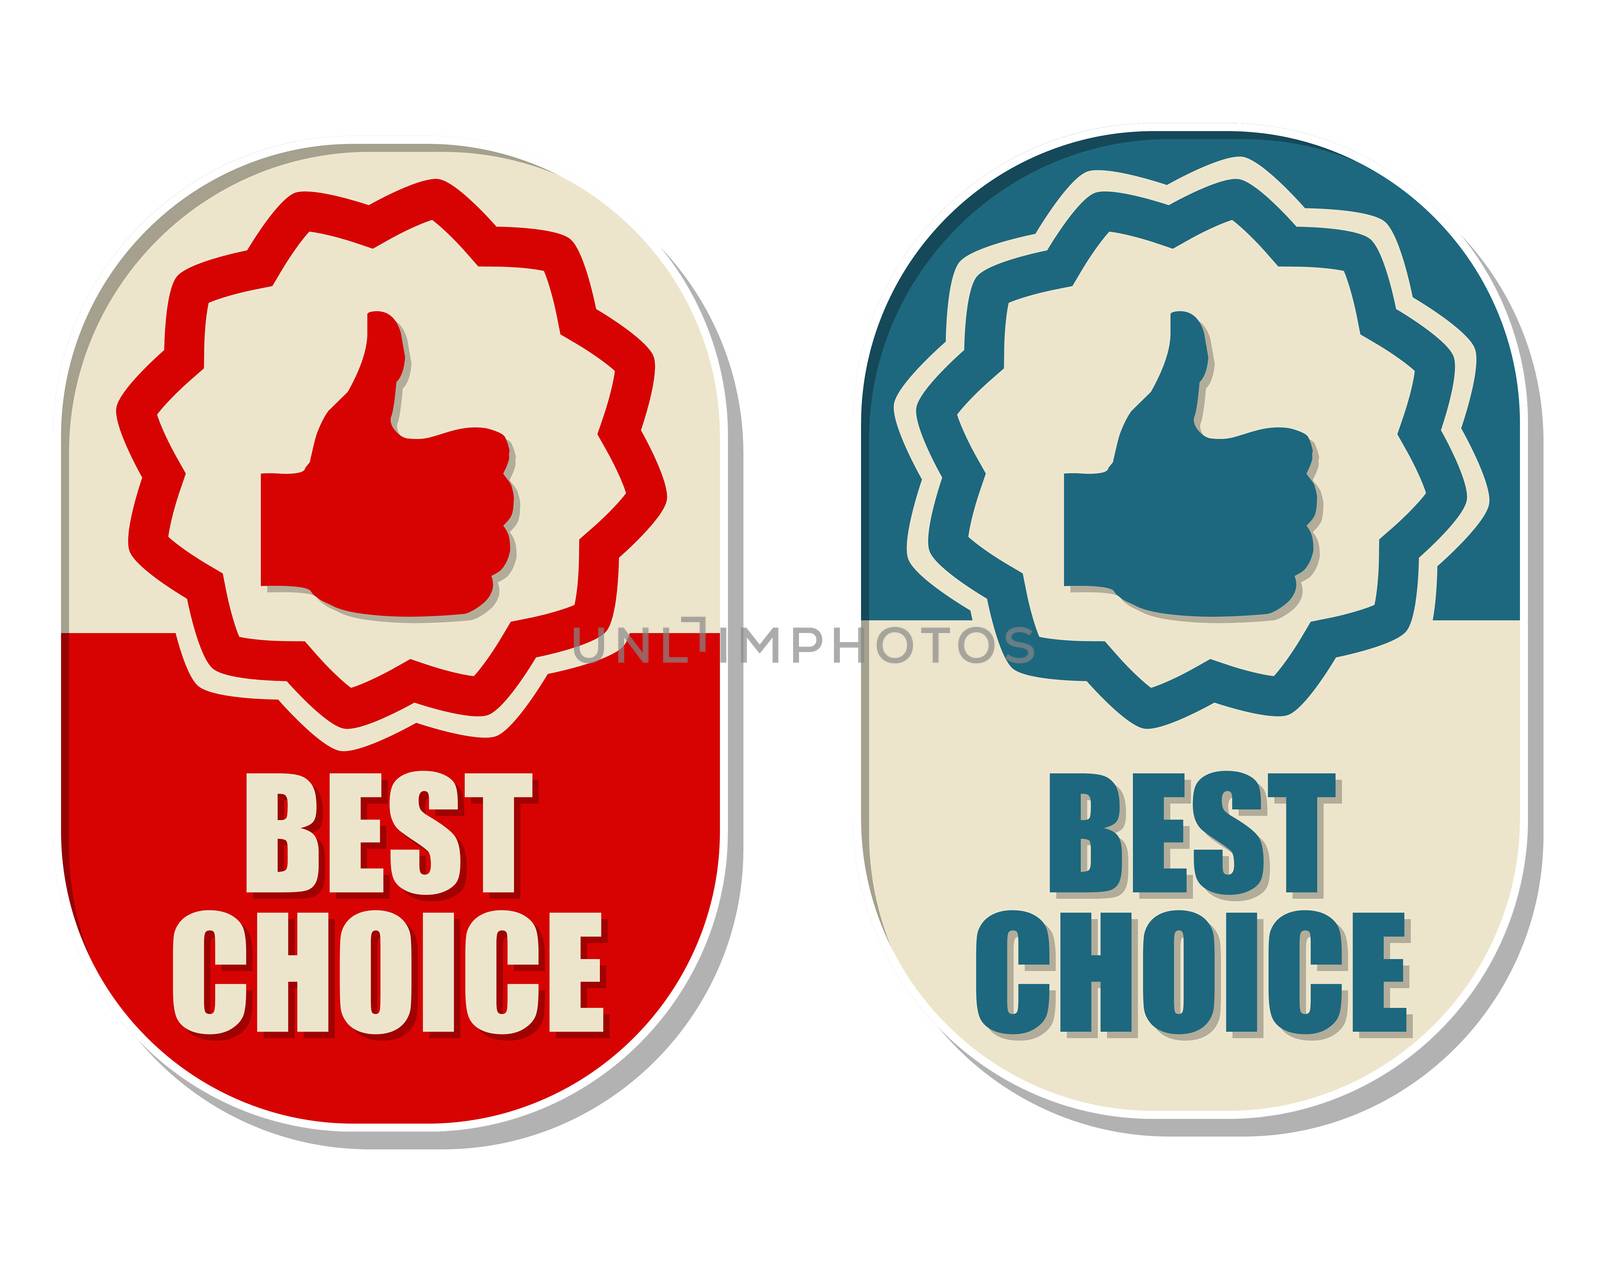 best choice and thumb up signs, two elliptical labels by marinini